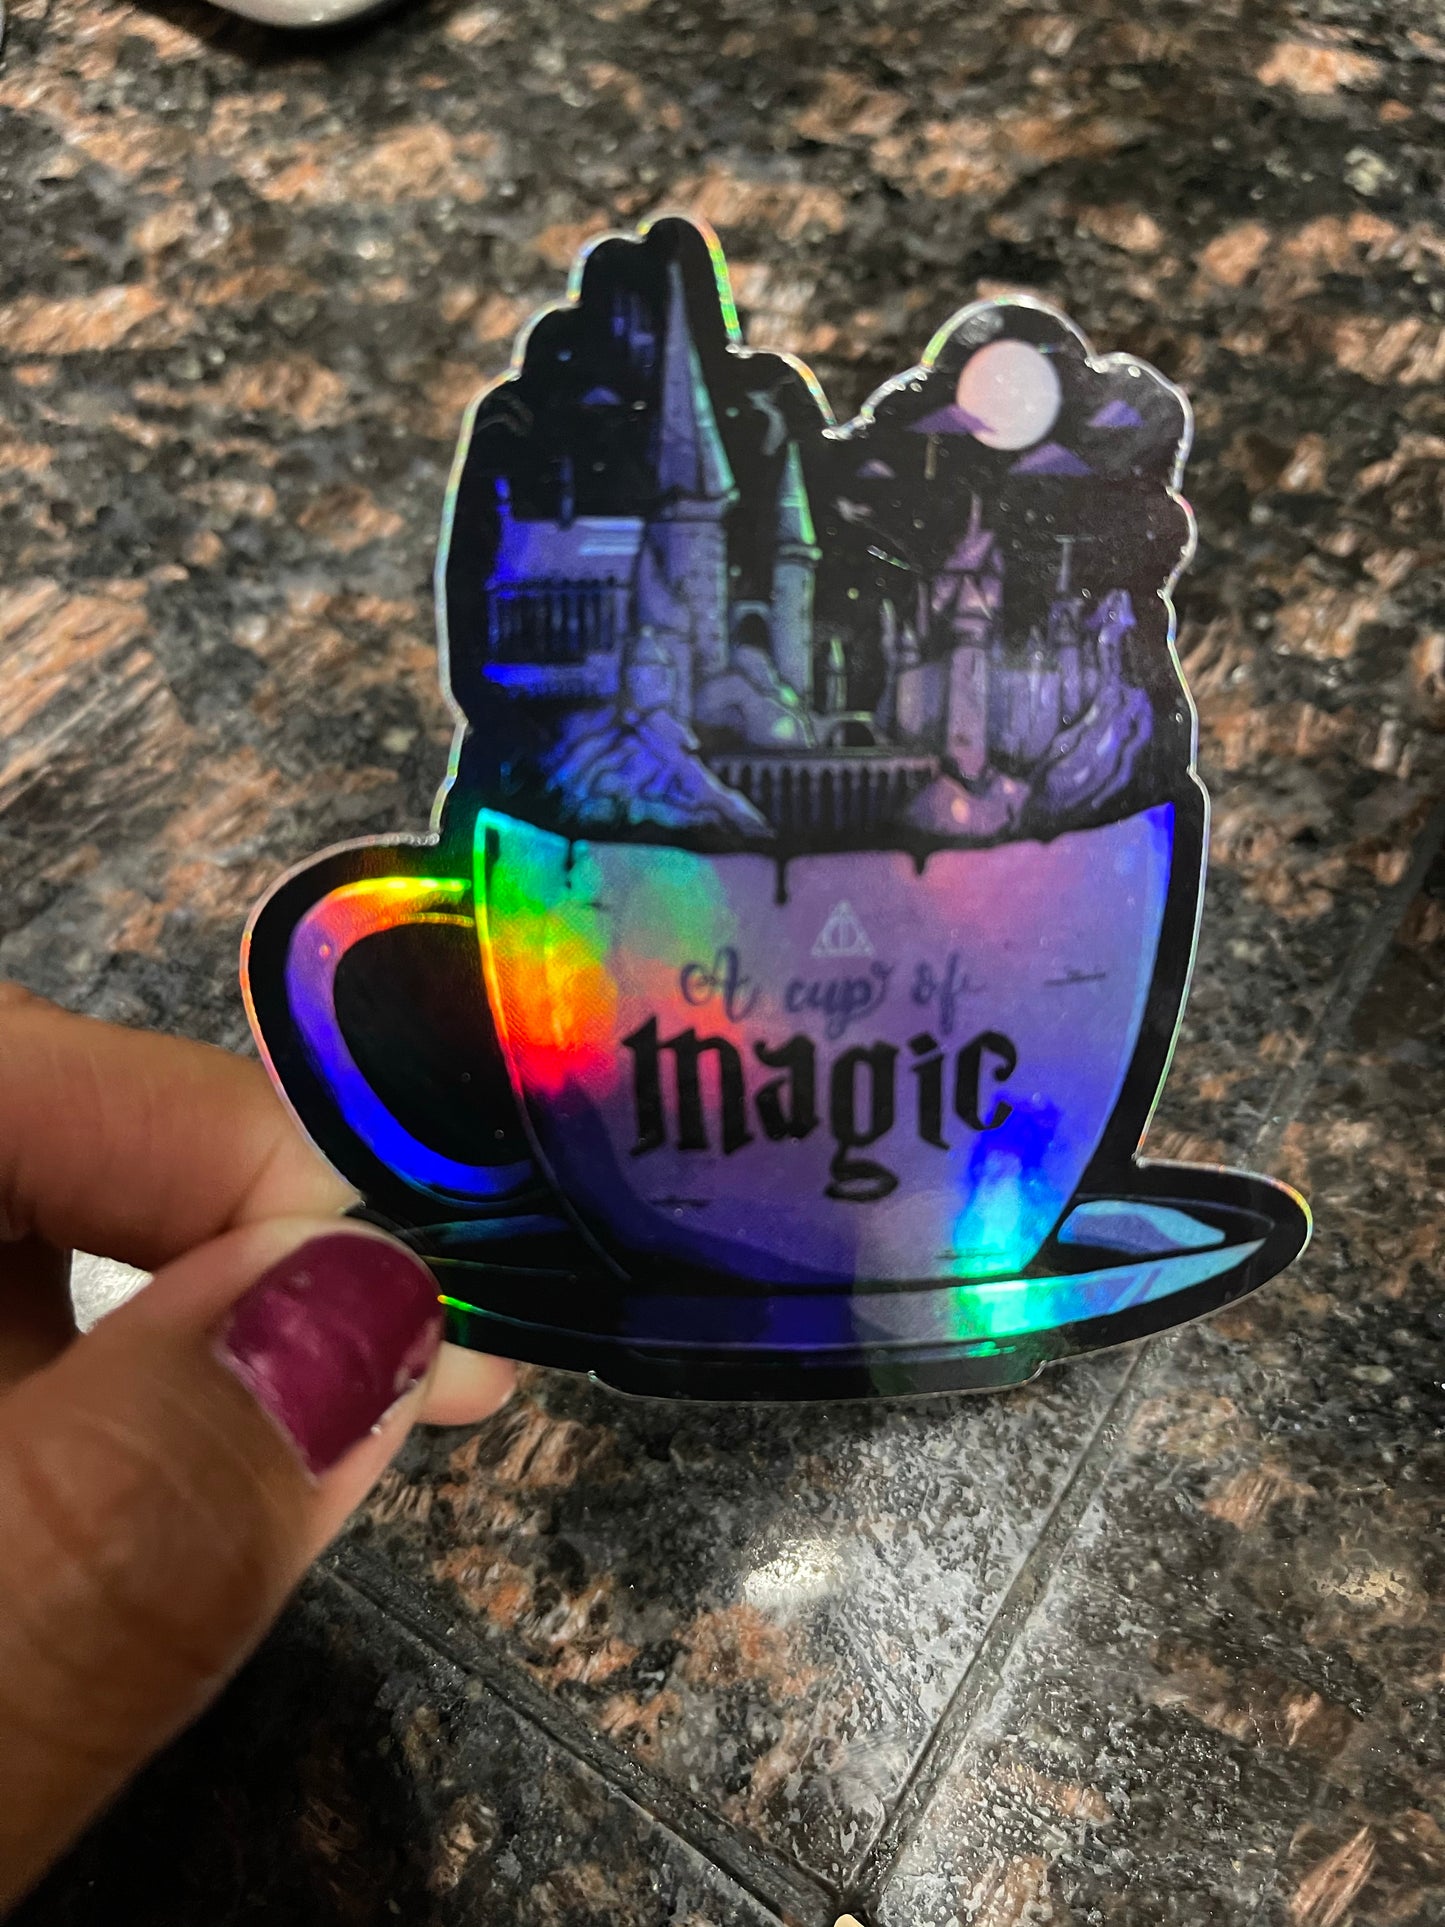 A cup of Magic   Holographic Sticker